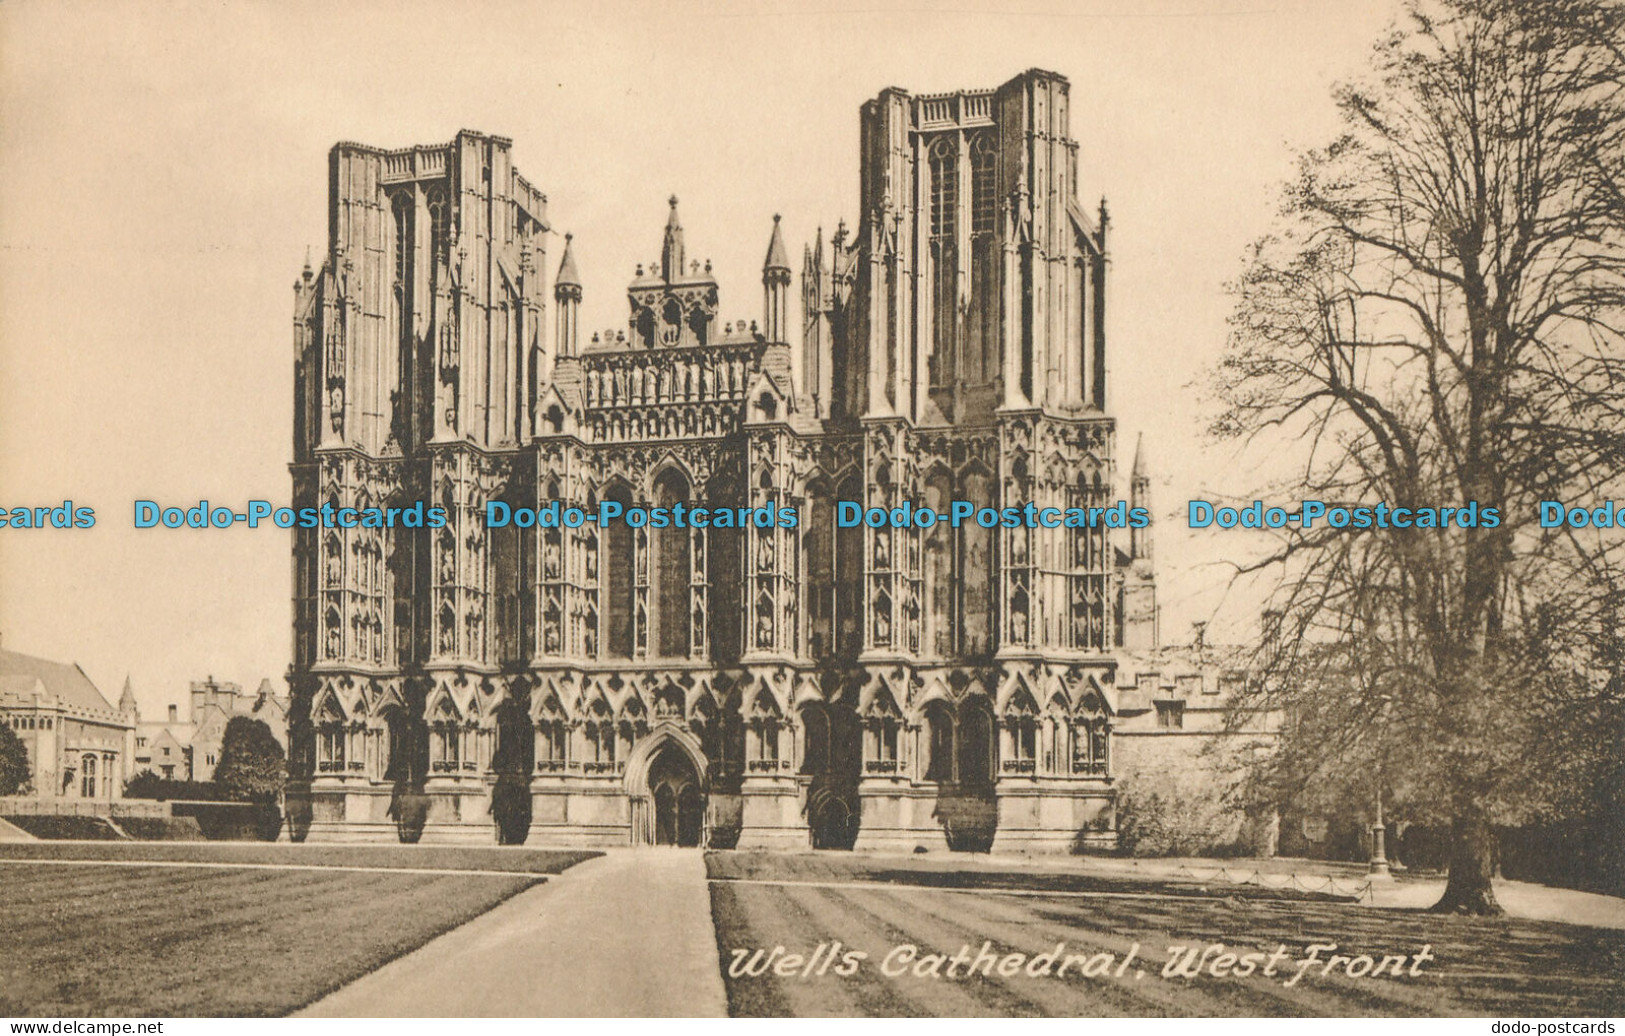 R006590 Wells Cathedral. West Front. T. W. Phillips. Frith. No 1055B - Monde